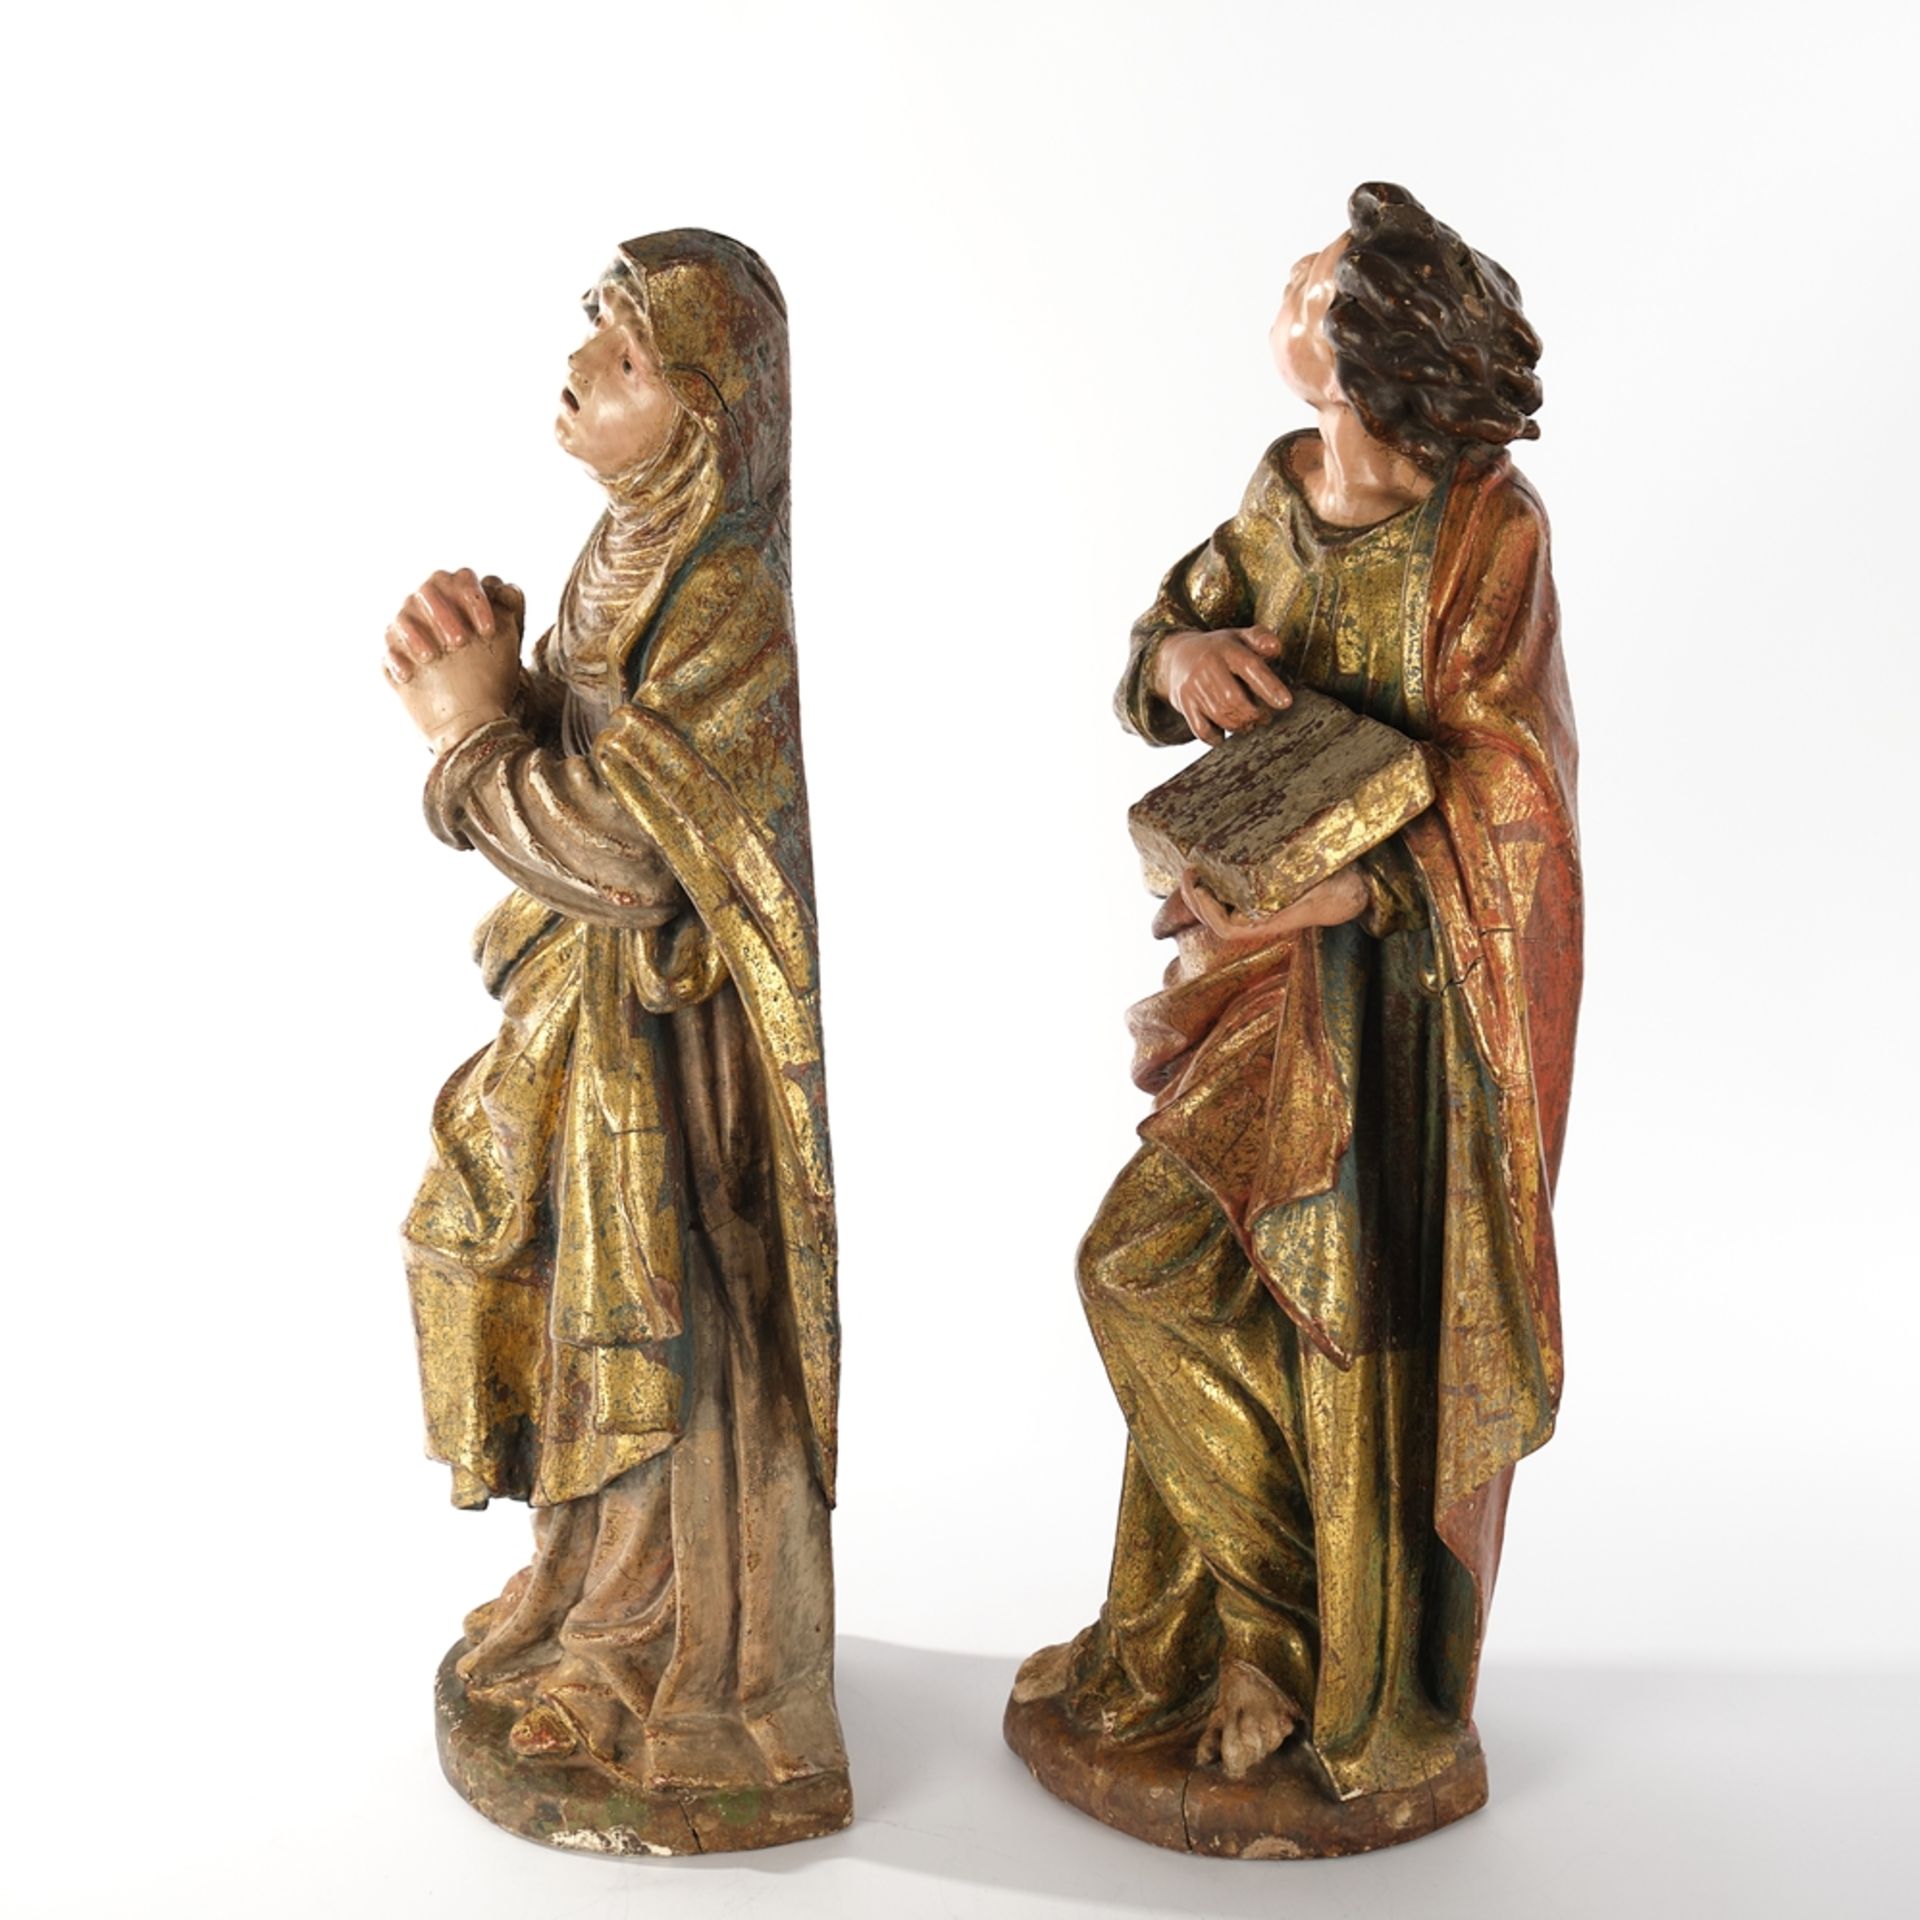 2 wooden figures(17th century),"Mary"and "John",(17th century), - Image 4 of 4